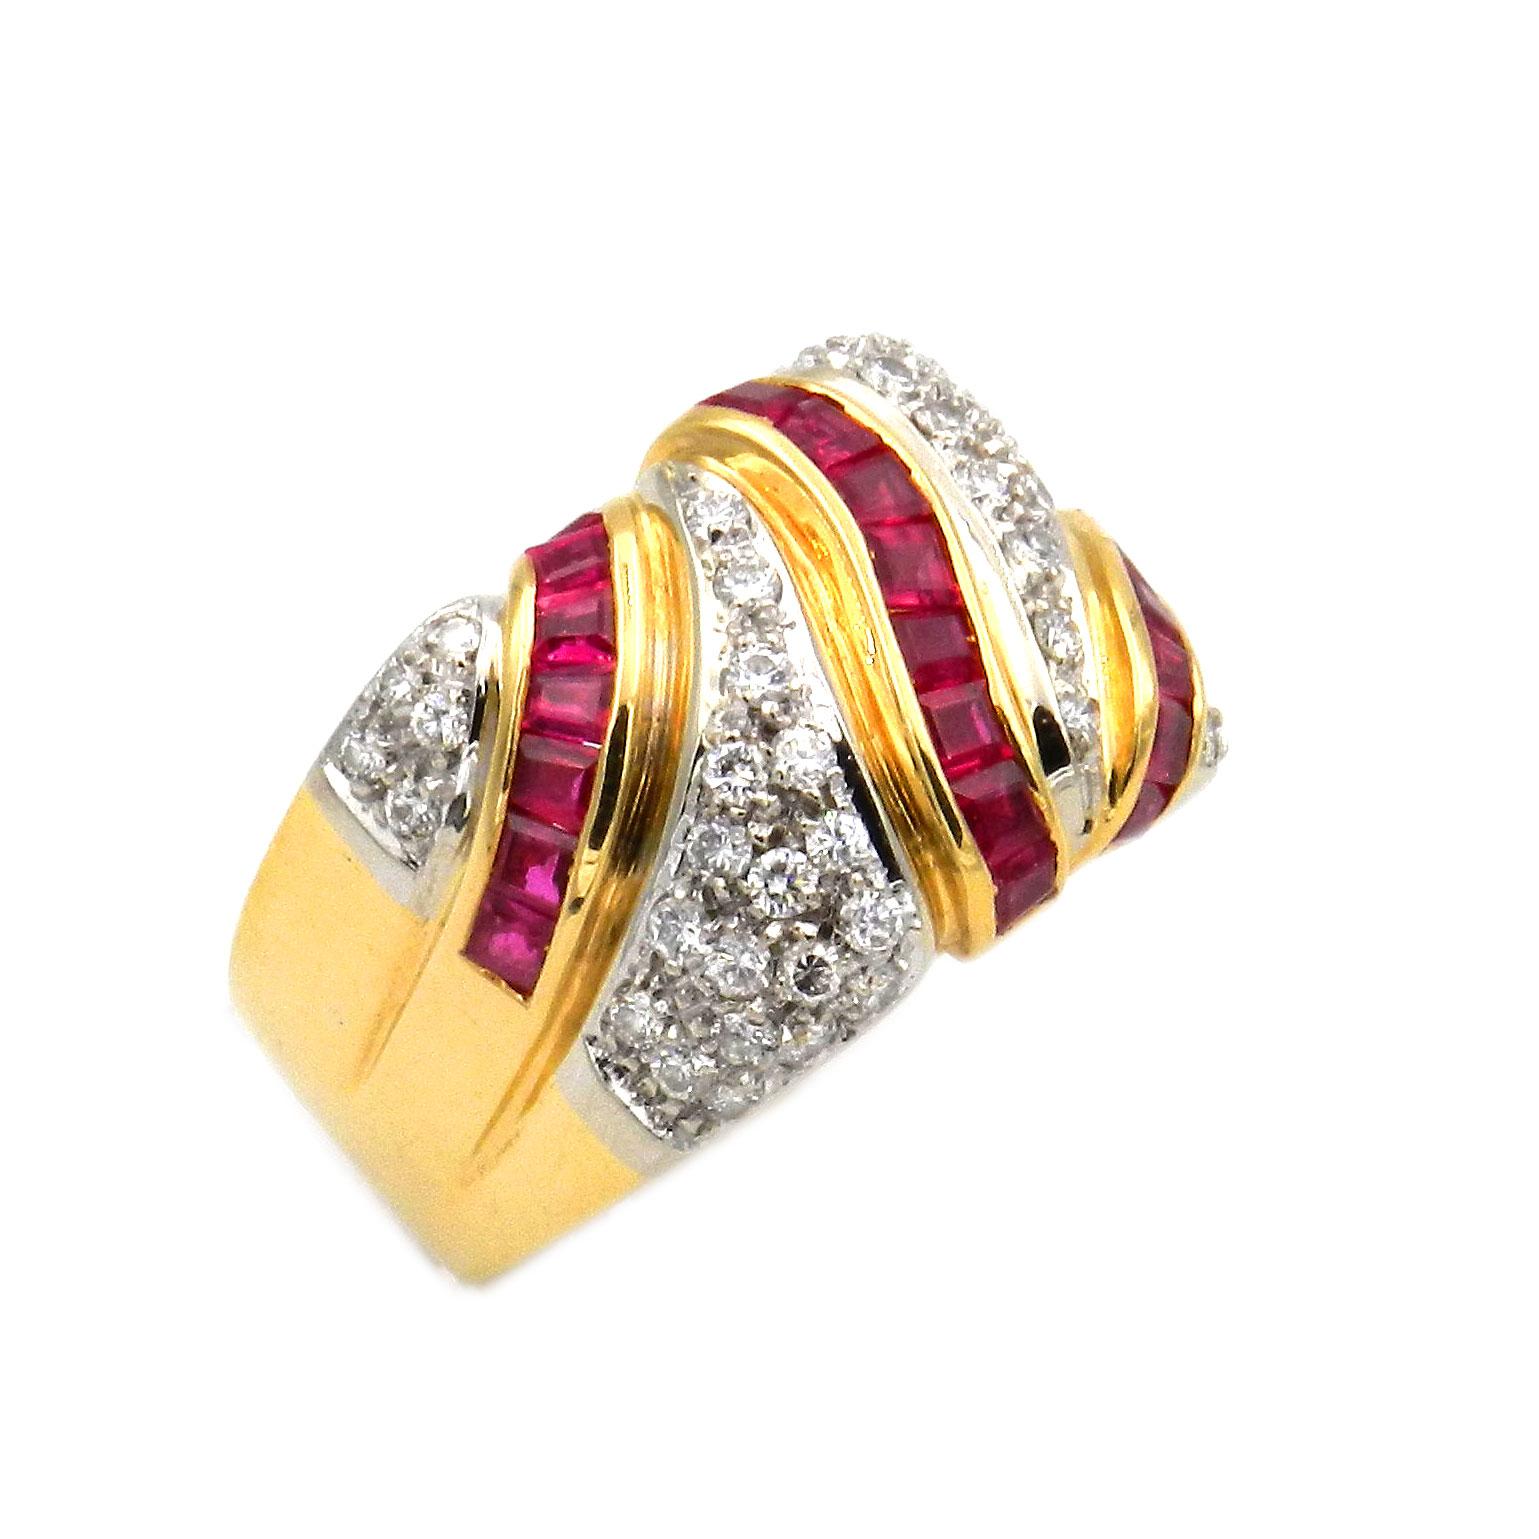 1.55 Carat Ruby and Diamond Band Ring in 18K Gold

This modern, sporty and elegant natural ruby and diamond band ring is a statement. The wide face decorated with three diagonal lines of luscious square cut rubies, invisible set and weighing 1.55